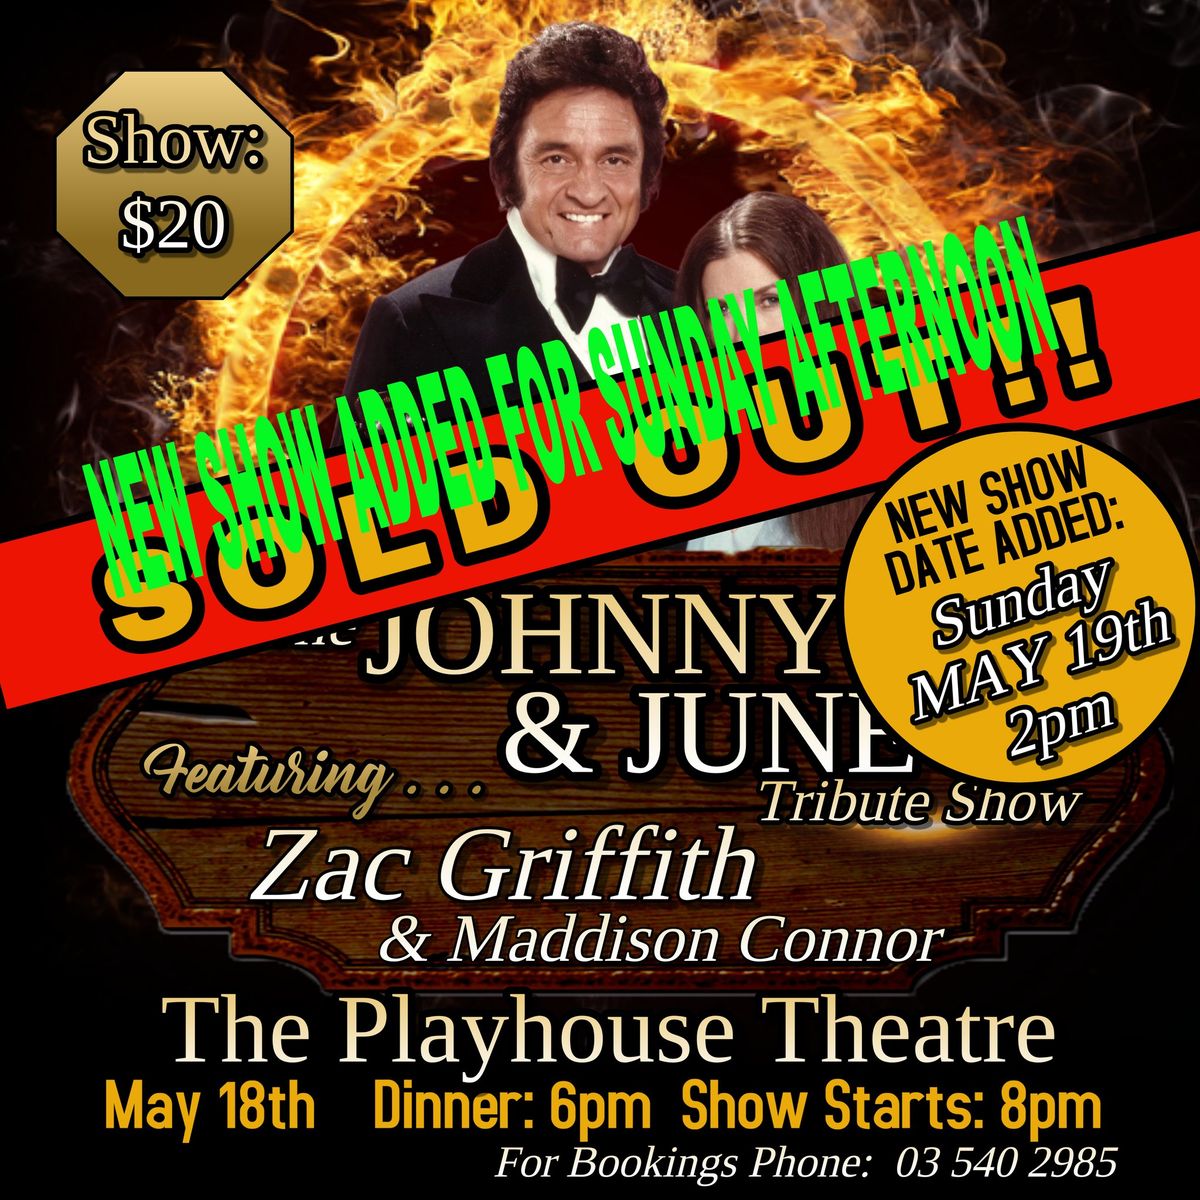 Johnny and June Tribute Show, presented by Zac Griffith & Maddison Connor, EXTAR SUNDAY SHOW ADDED